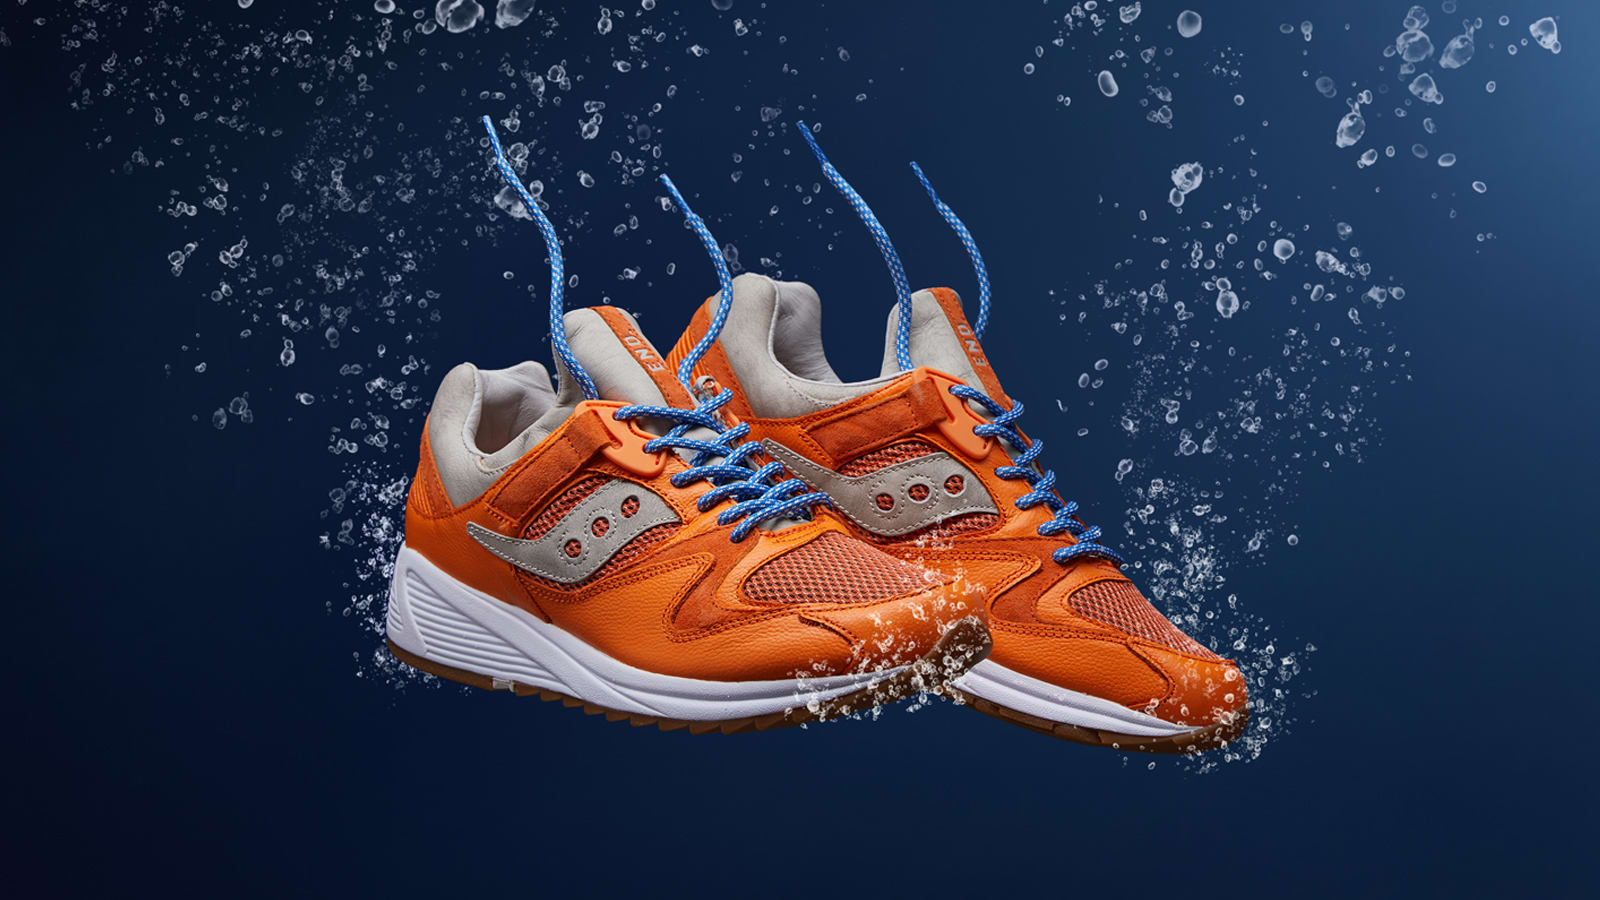 saucony-lobster-1